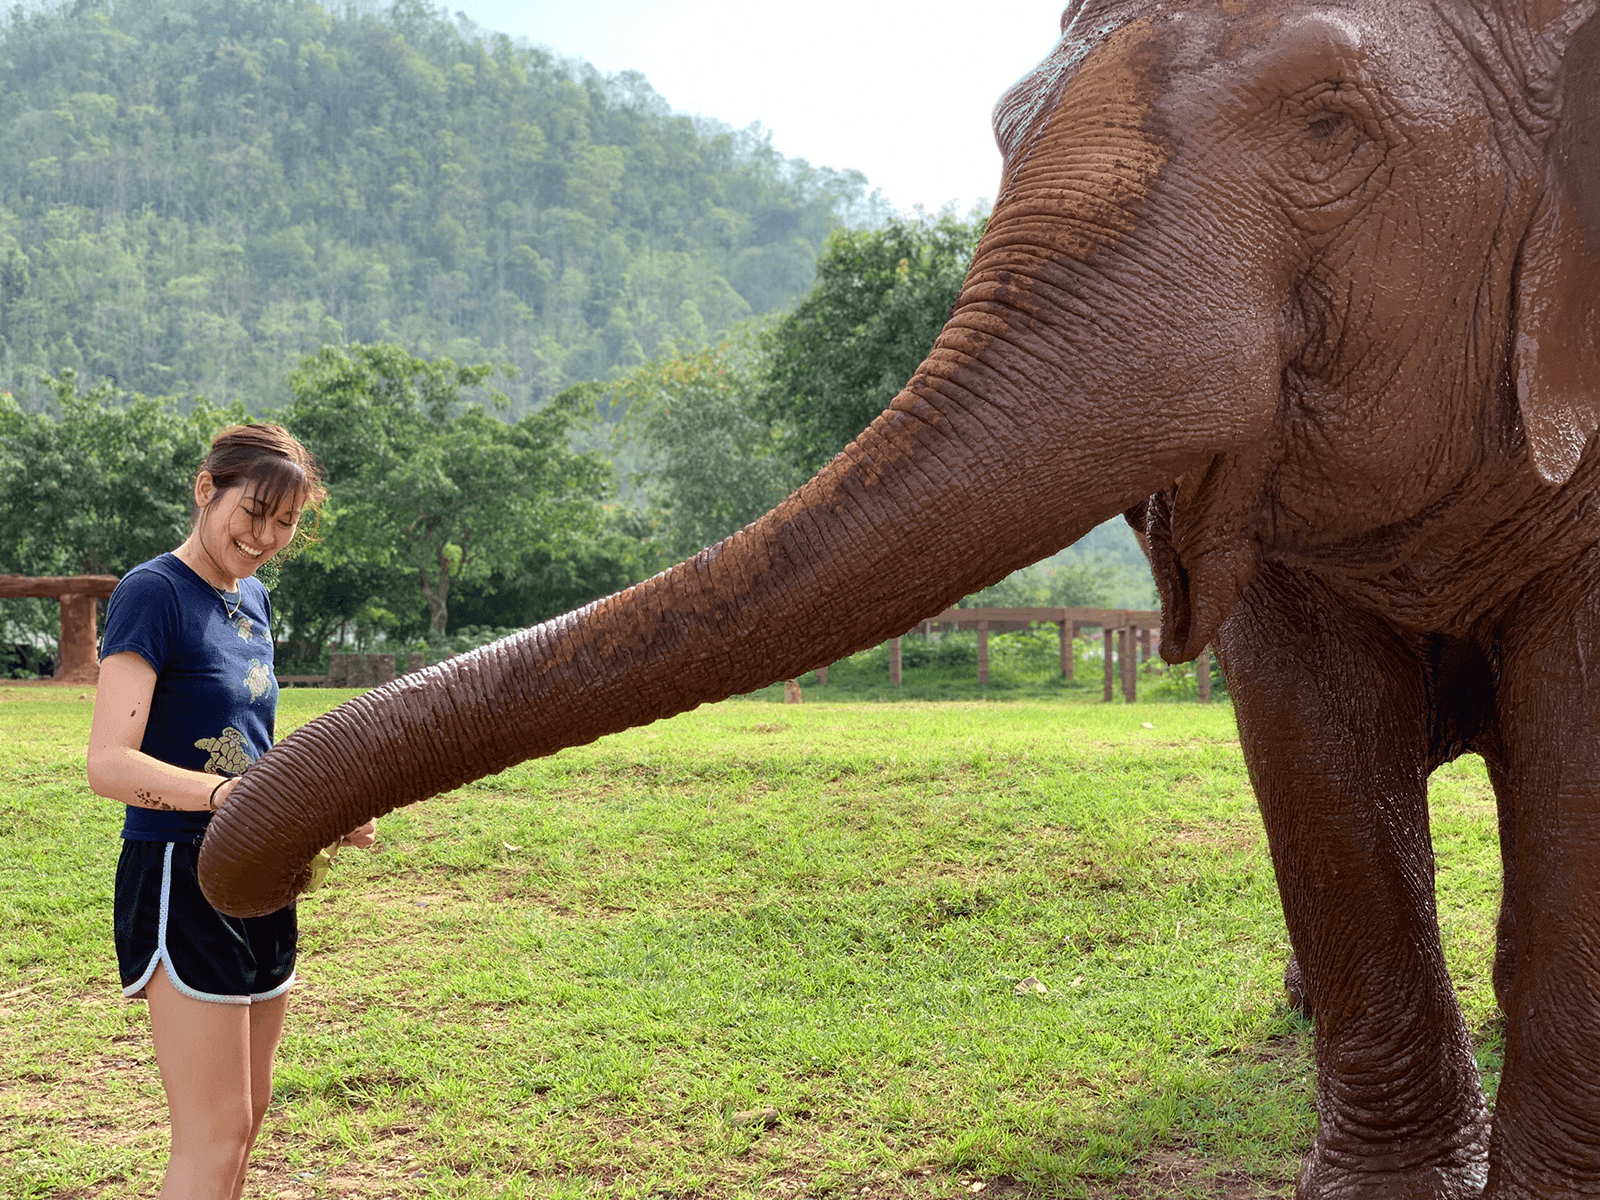 Audrey Ponder poses with one of the elephants she helped care for this summer.